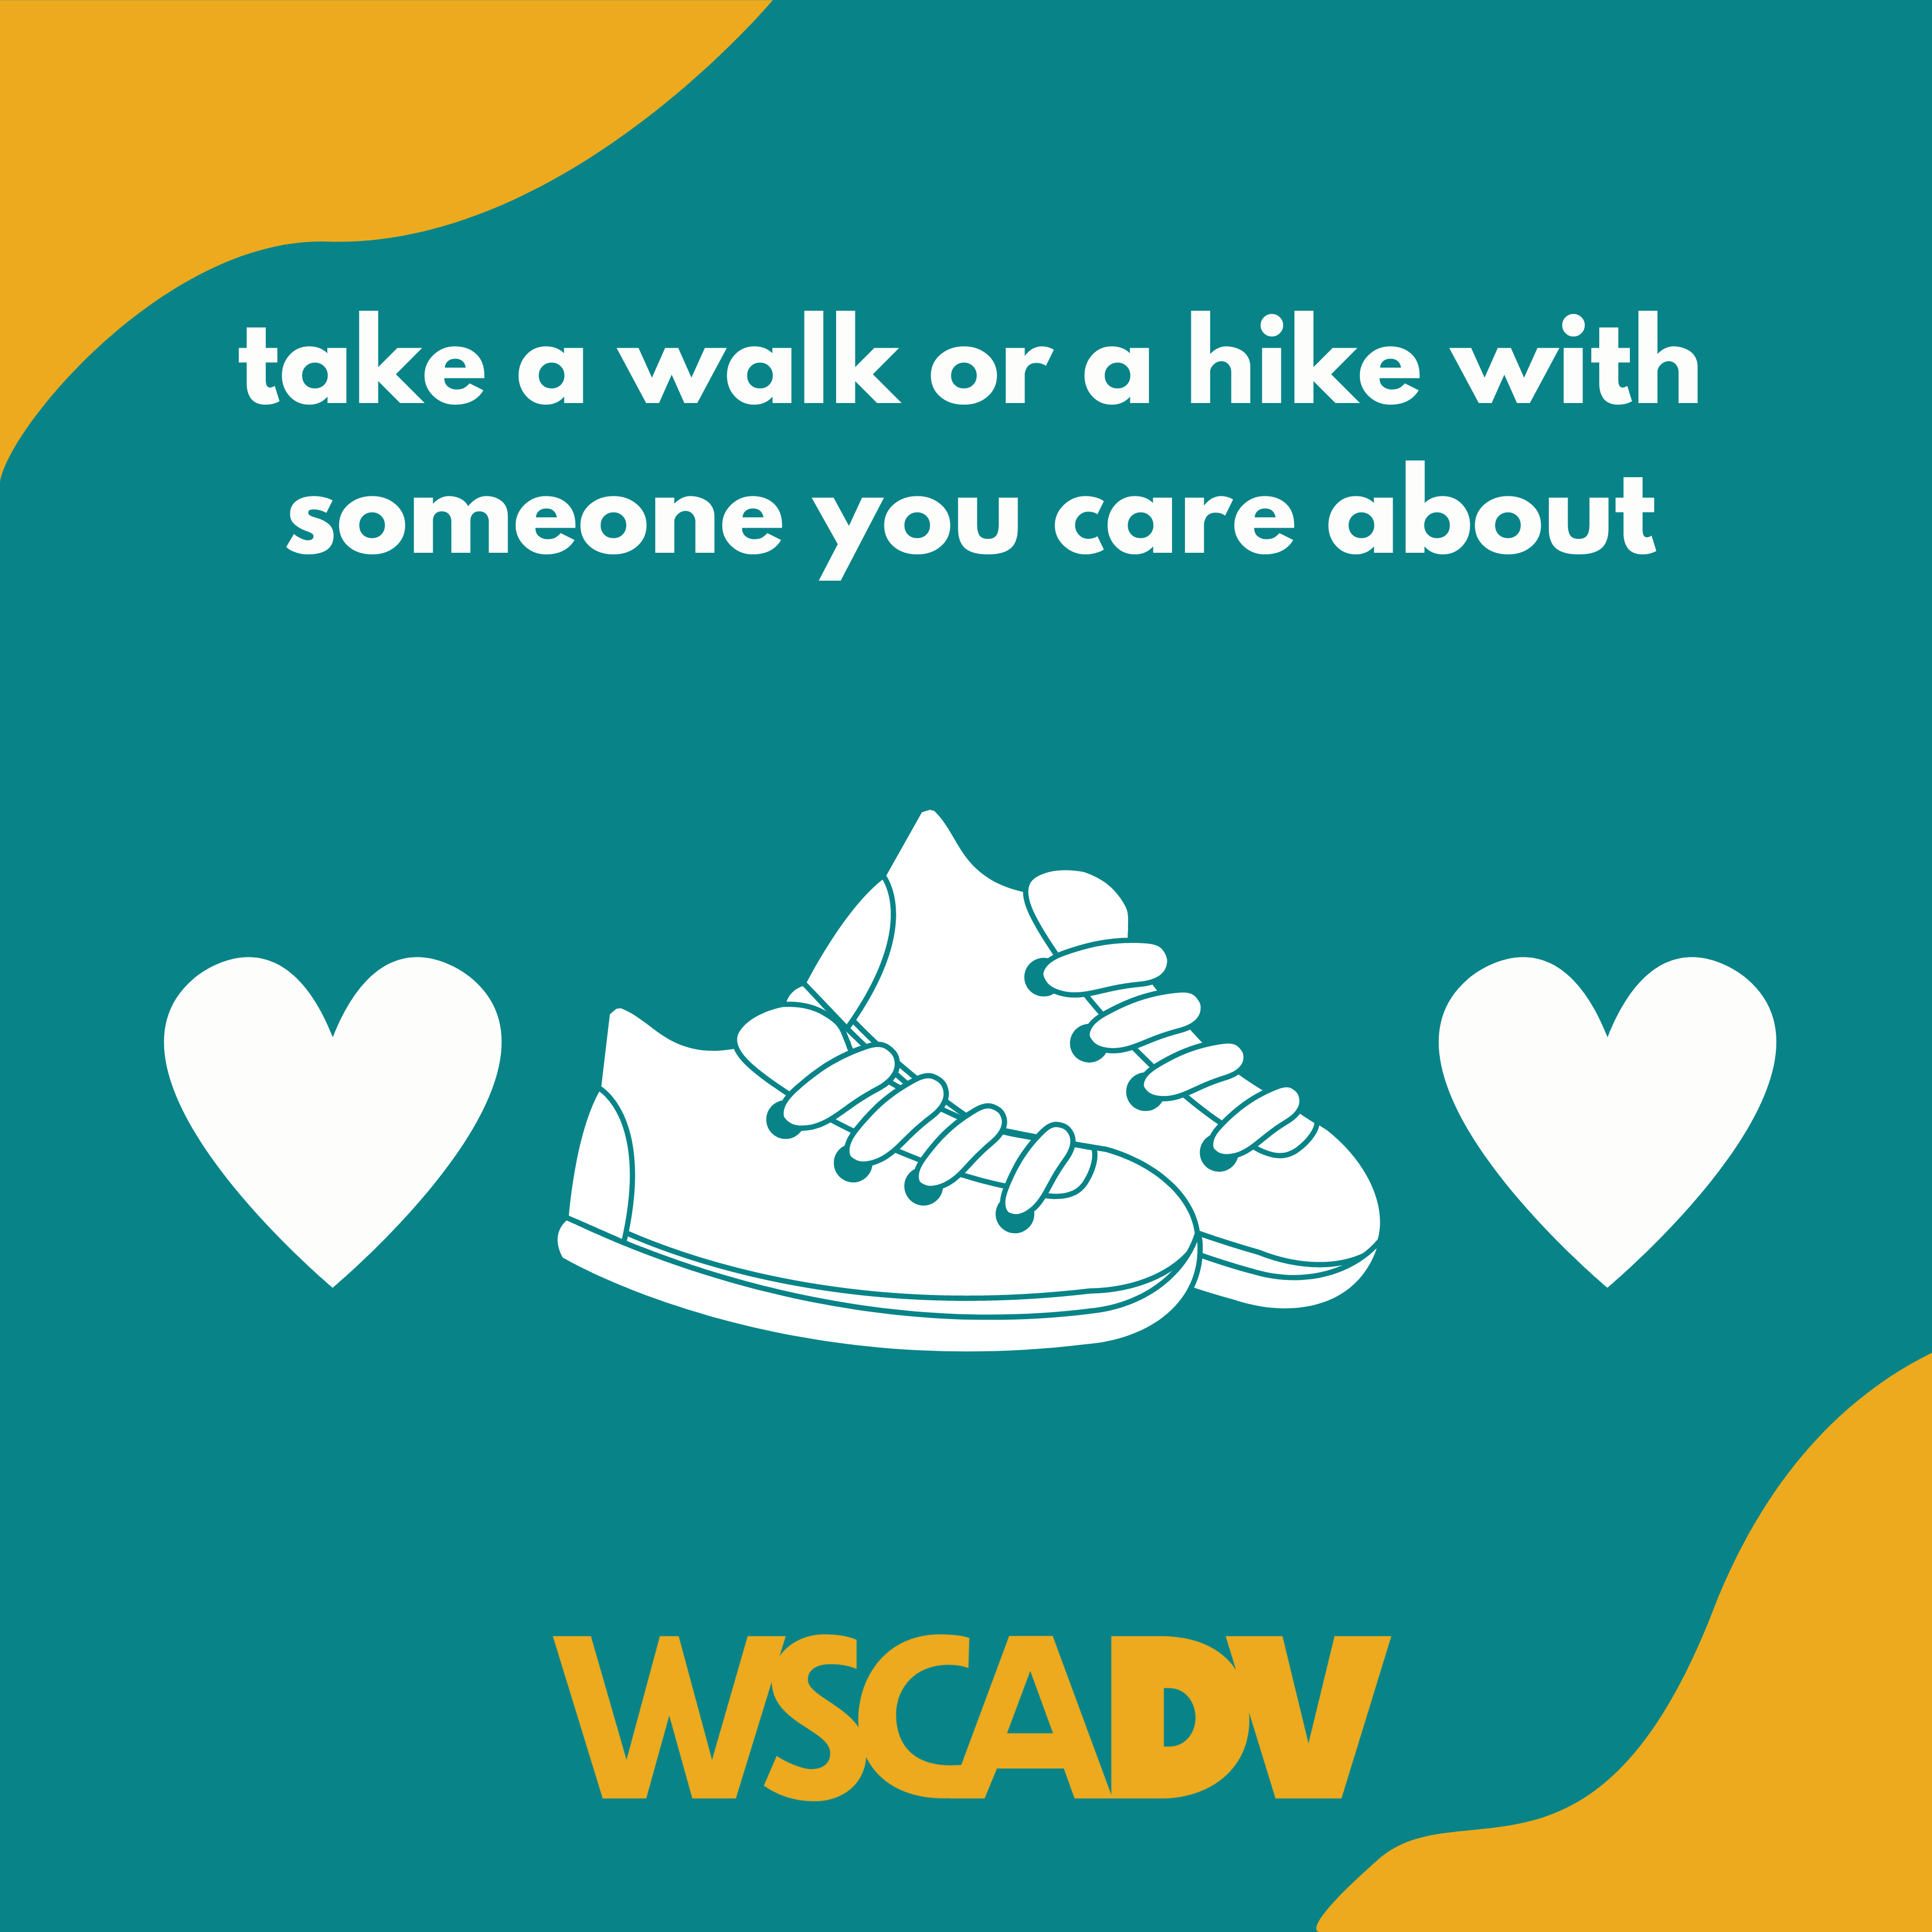 take a walk or a hike with someone you care about